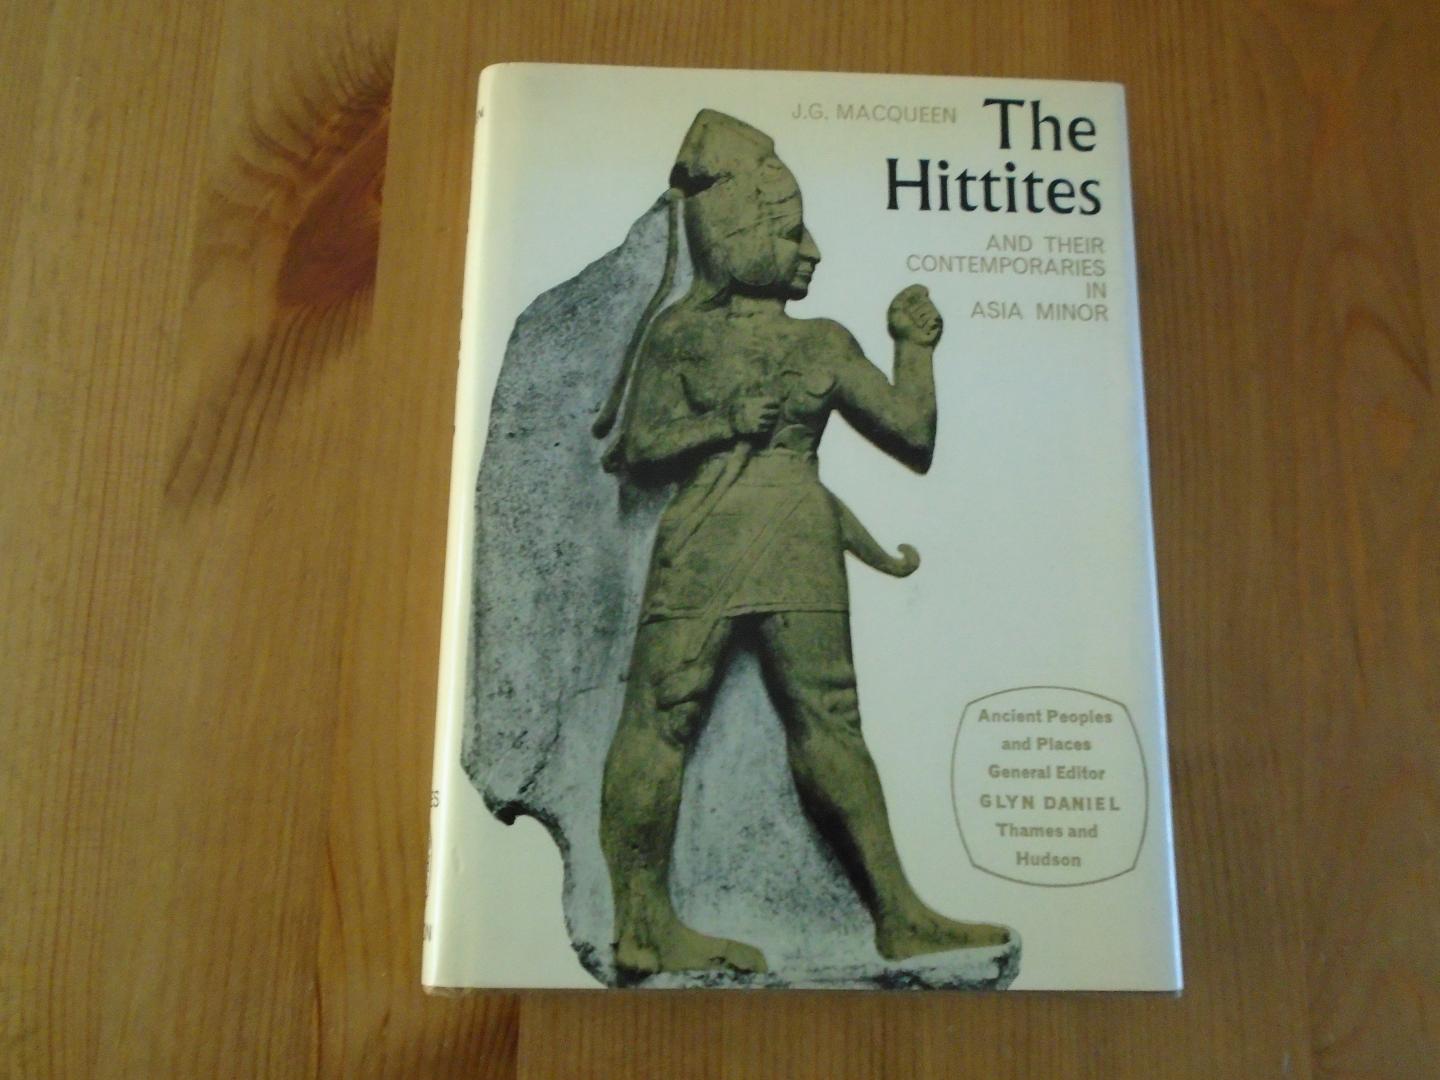 Macqueen, J.G. - The Hittites and their Contemporaries in Asia Minor